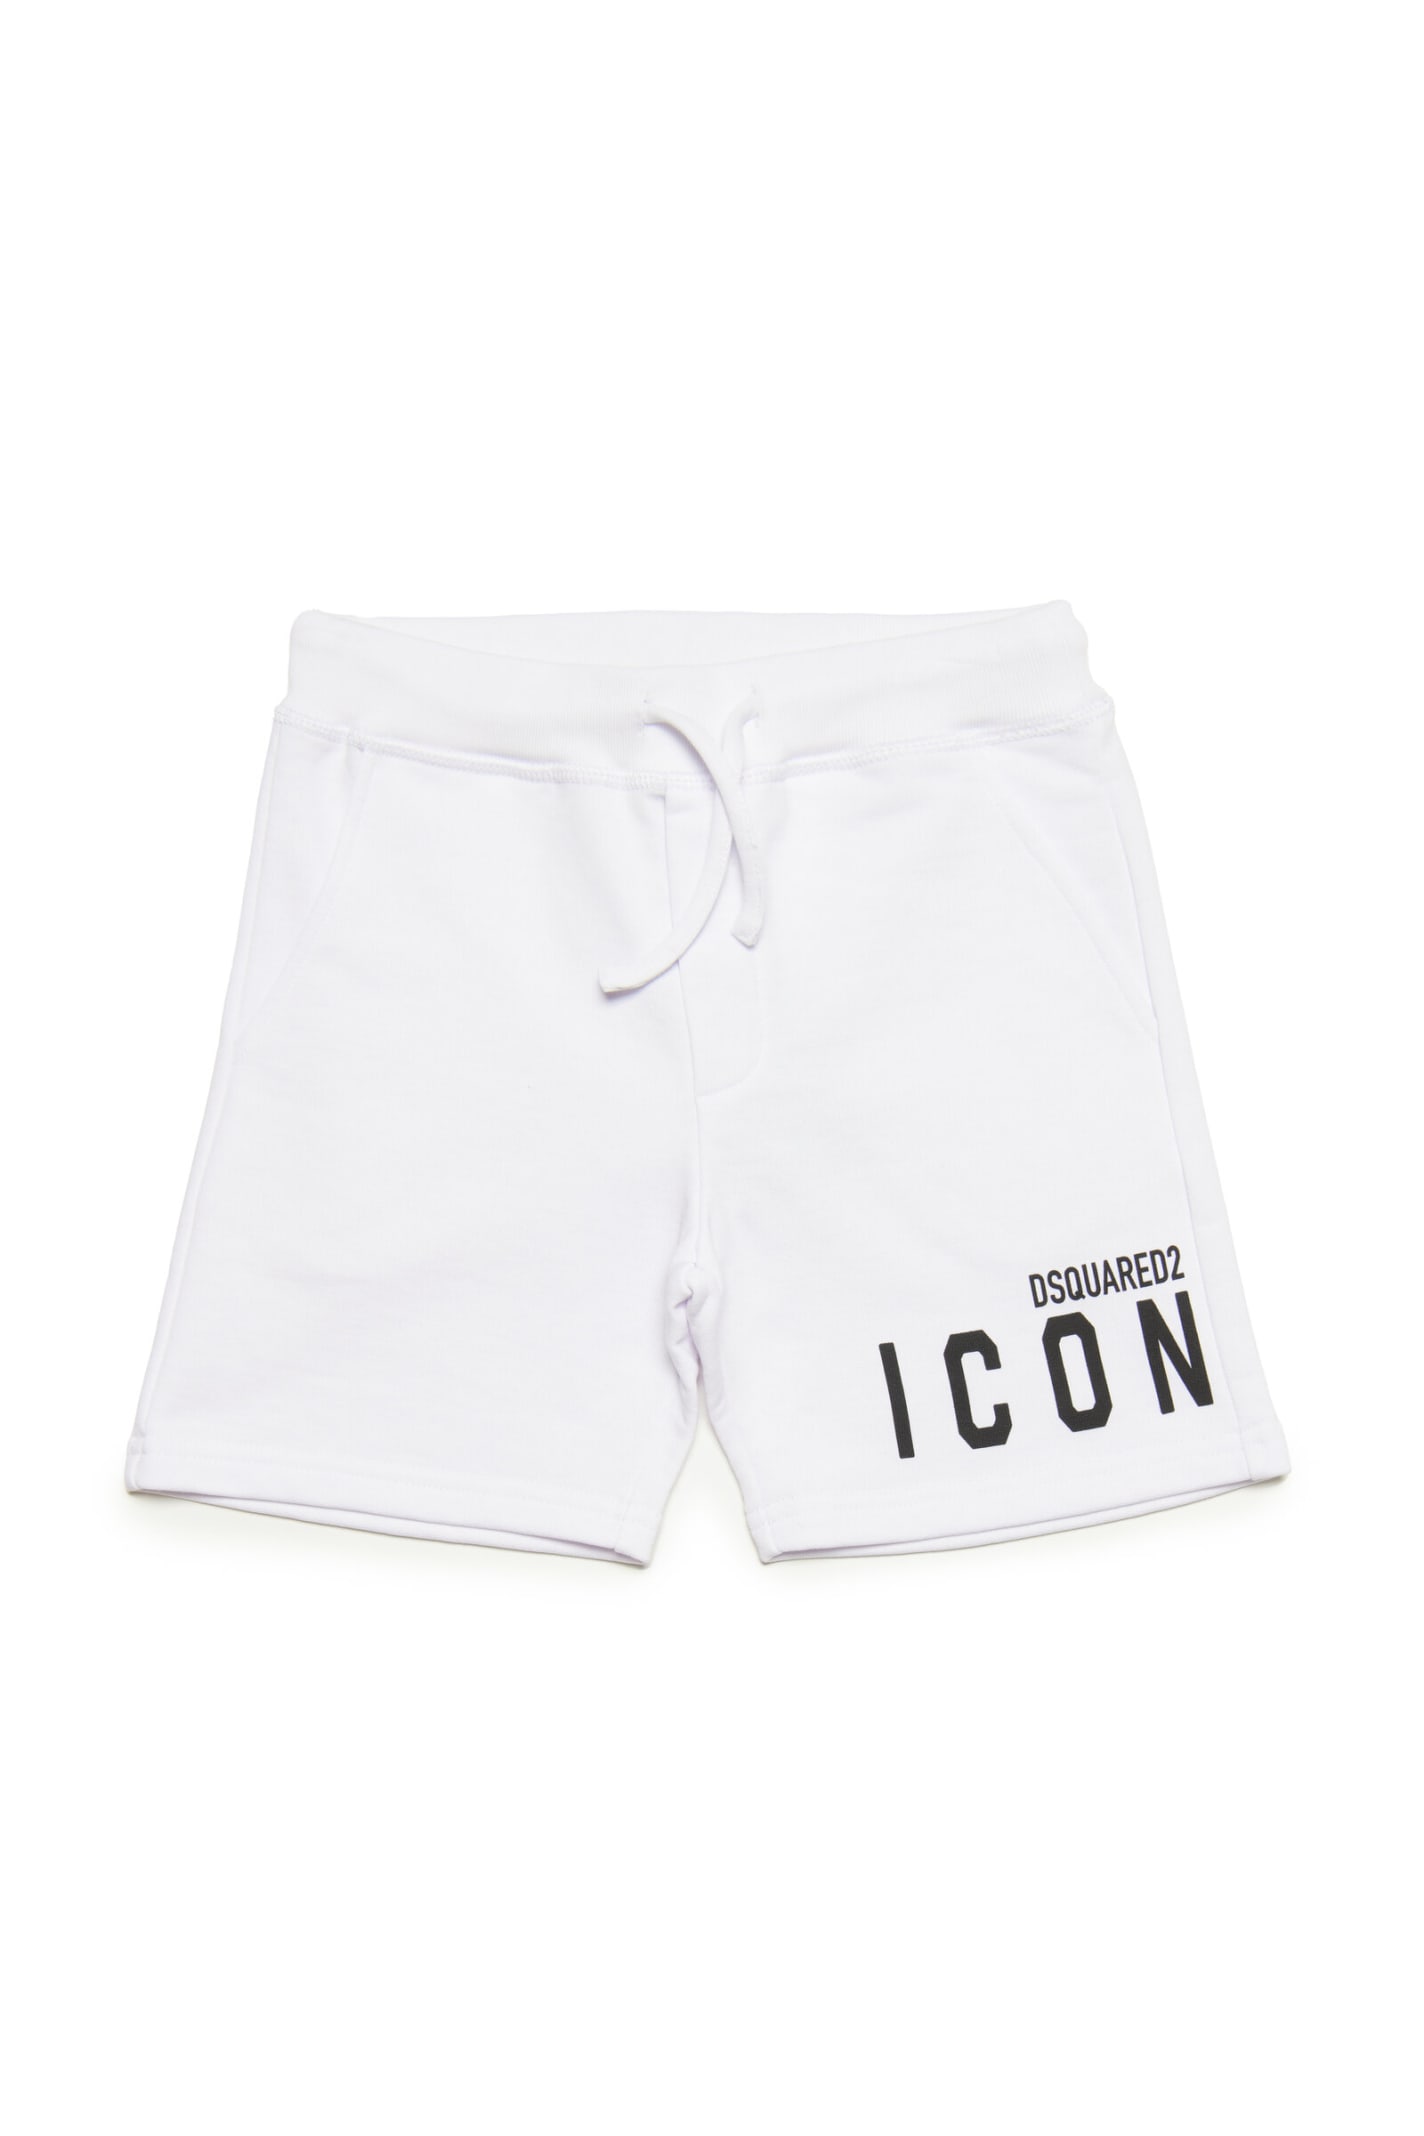 DSQUARED2 D2P602U-ICON SHORTS DSQUARED WHITE COTTON SHORTS WITH ICON LOGO